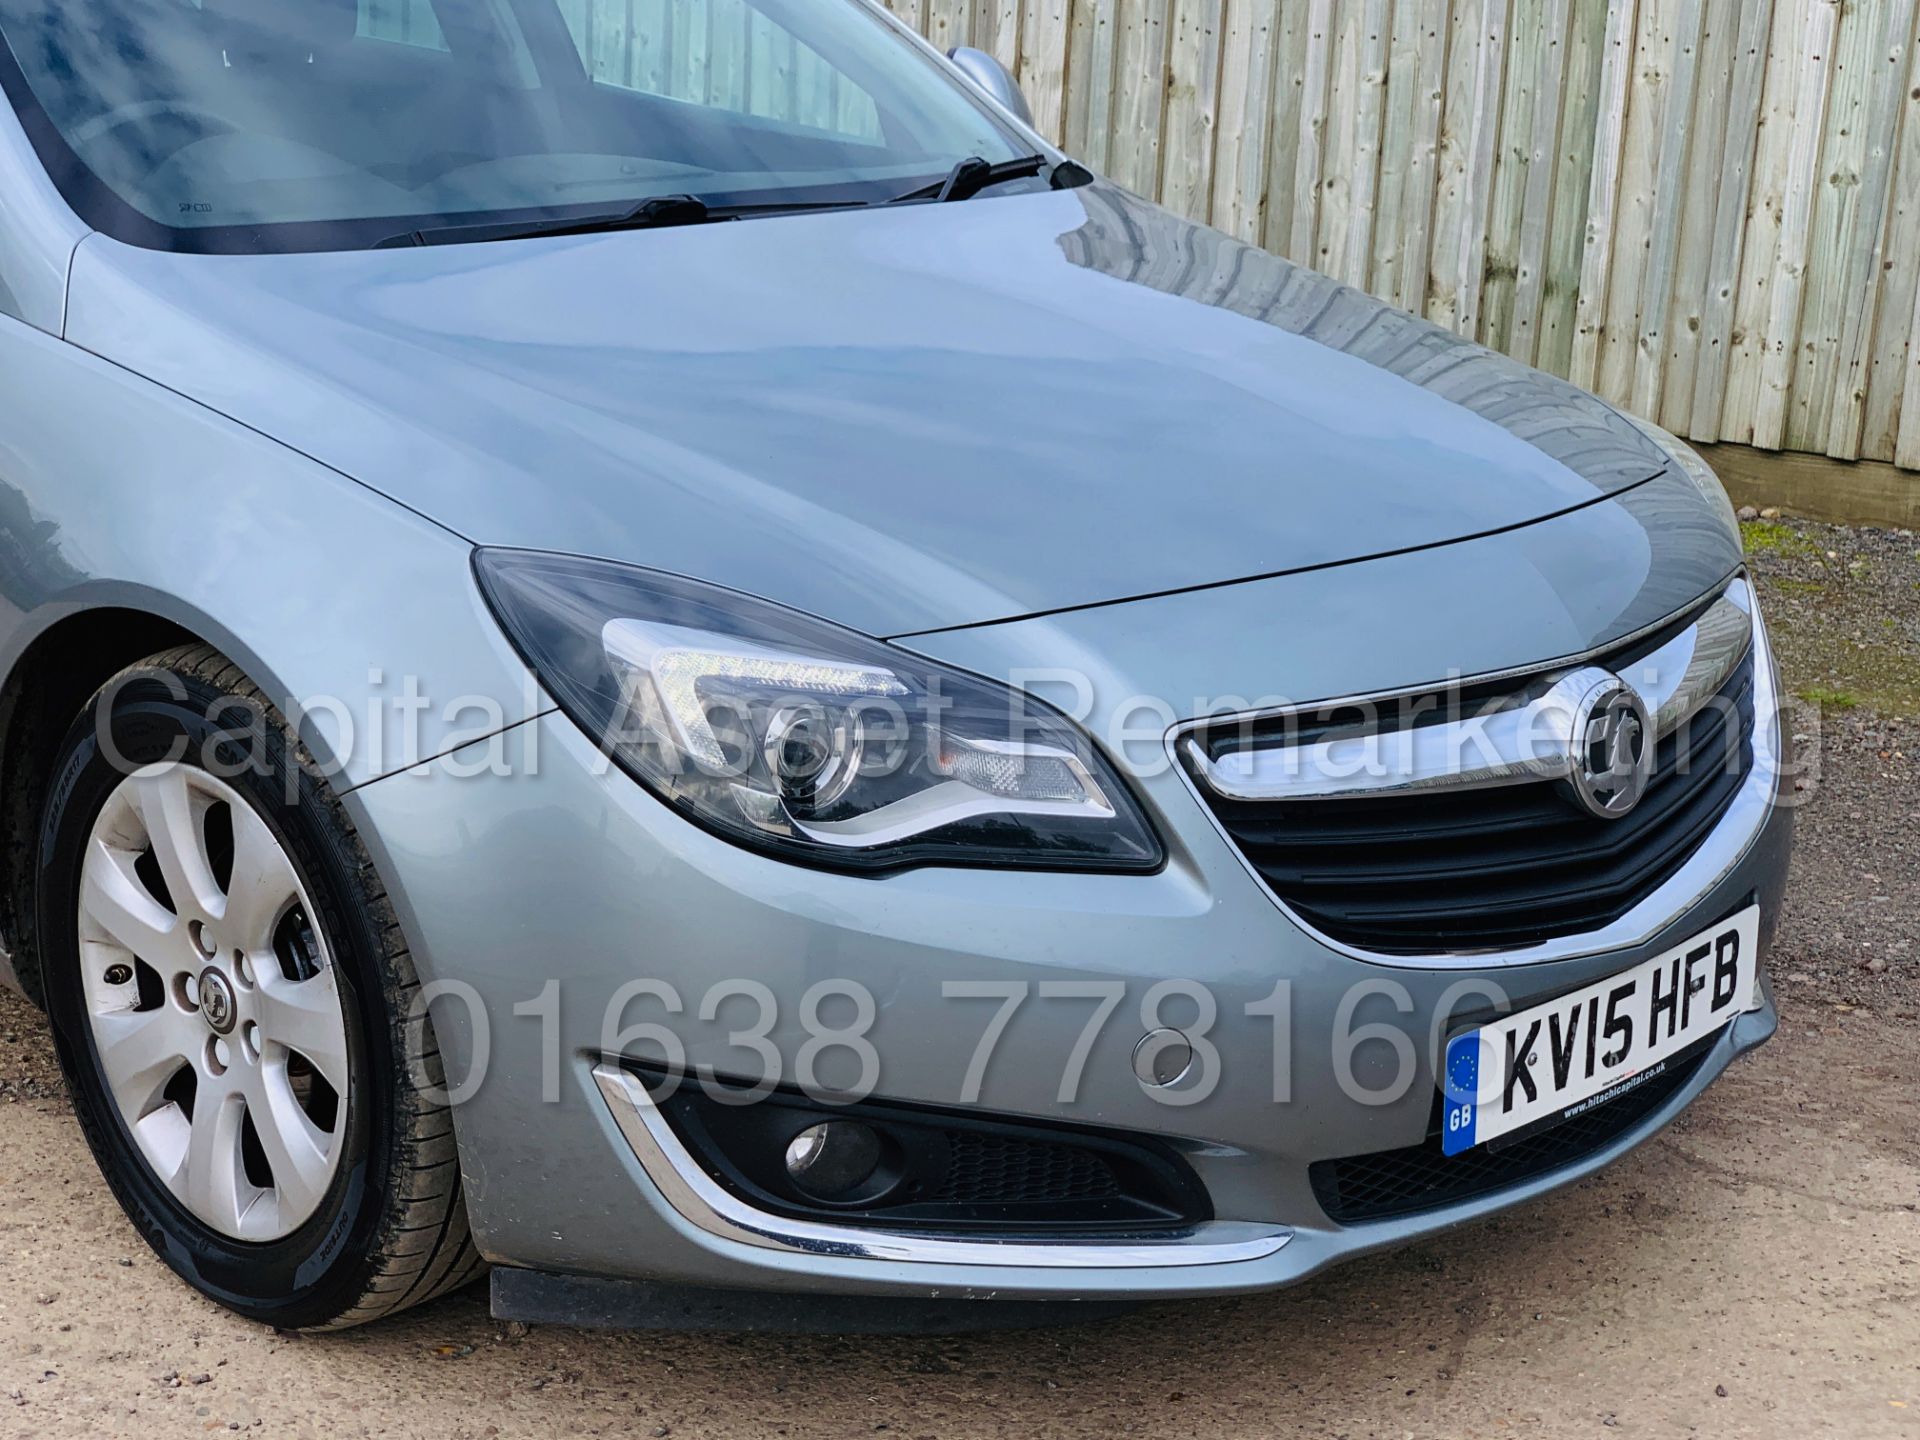 (On Sale) VAUXHALL INSIGNIA *SRI EDITION* (2015) '2.0 CDTI - STOP/START - 6 SPEED' (1 OWNER) - Image 13 of 40